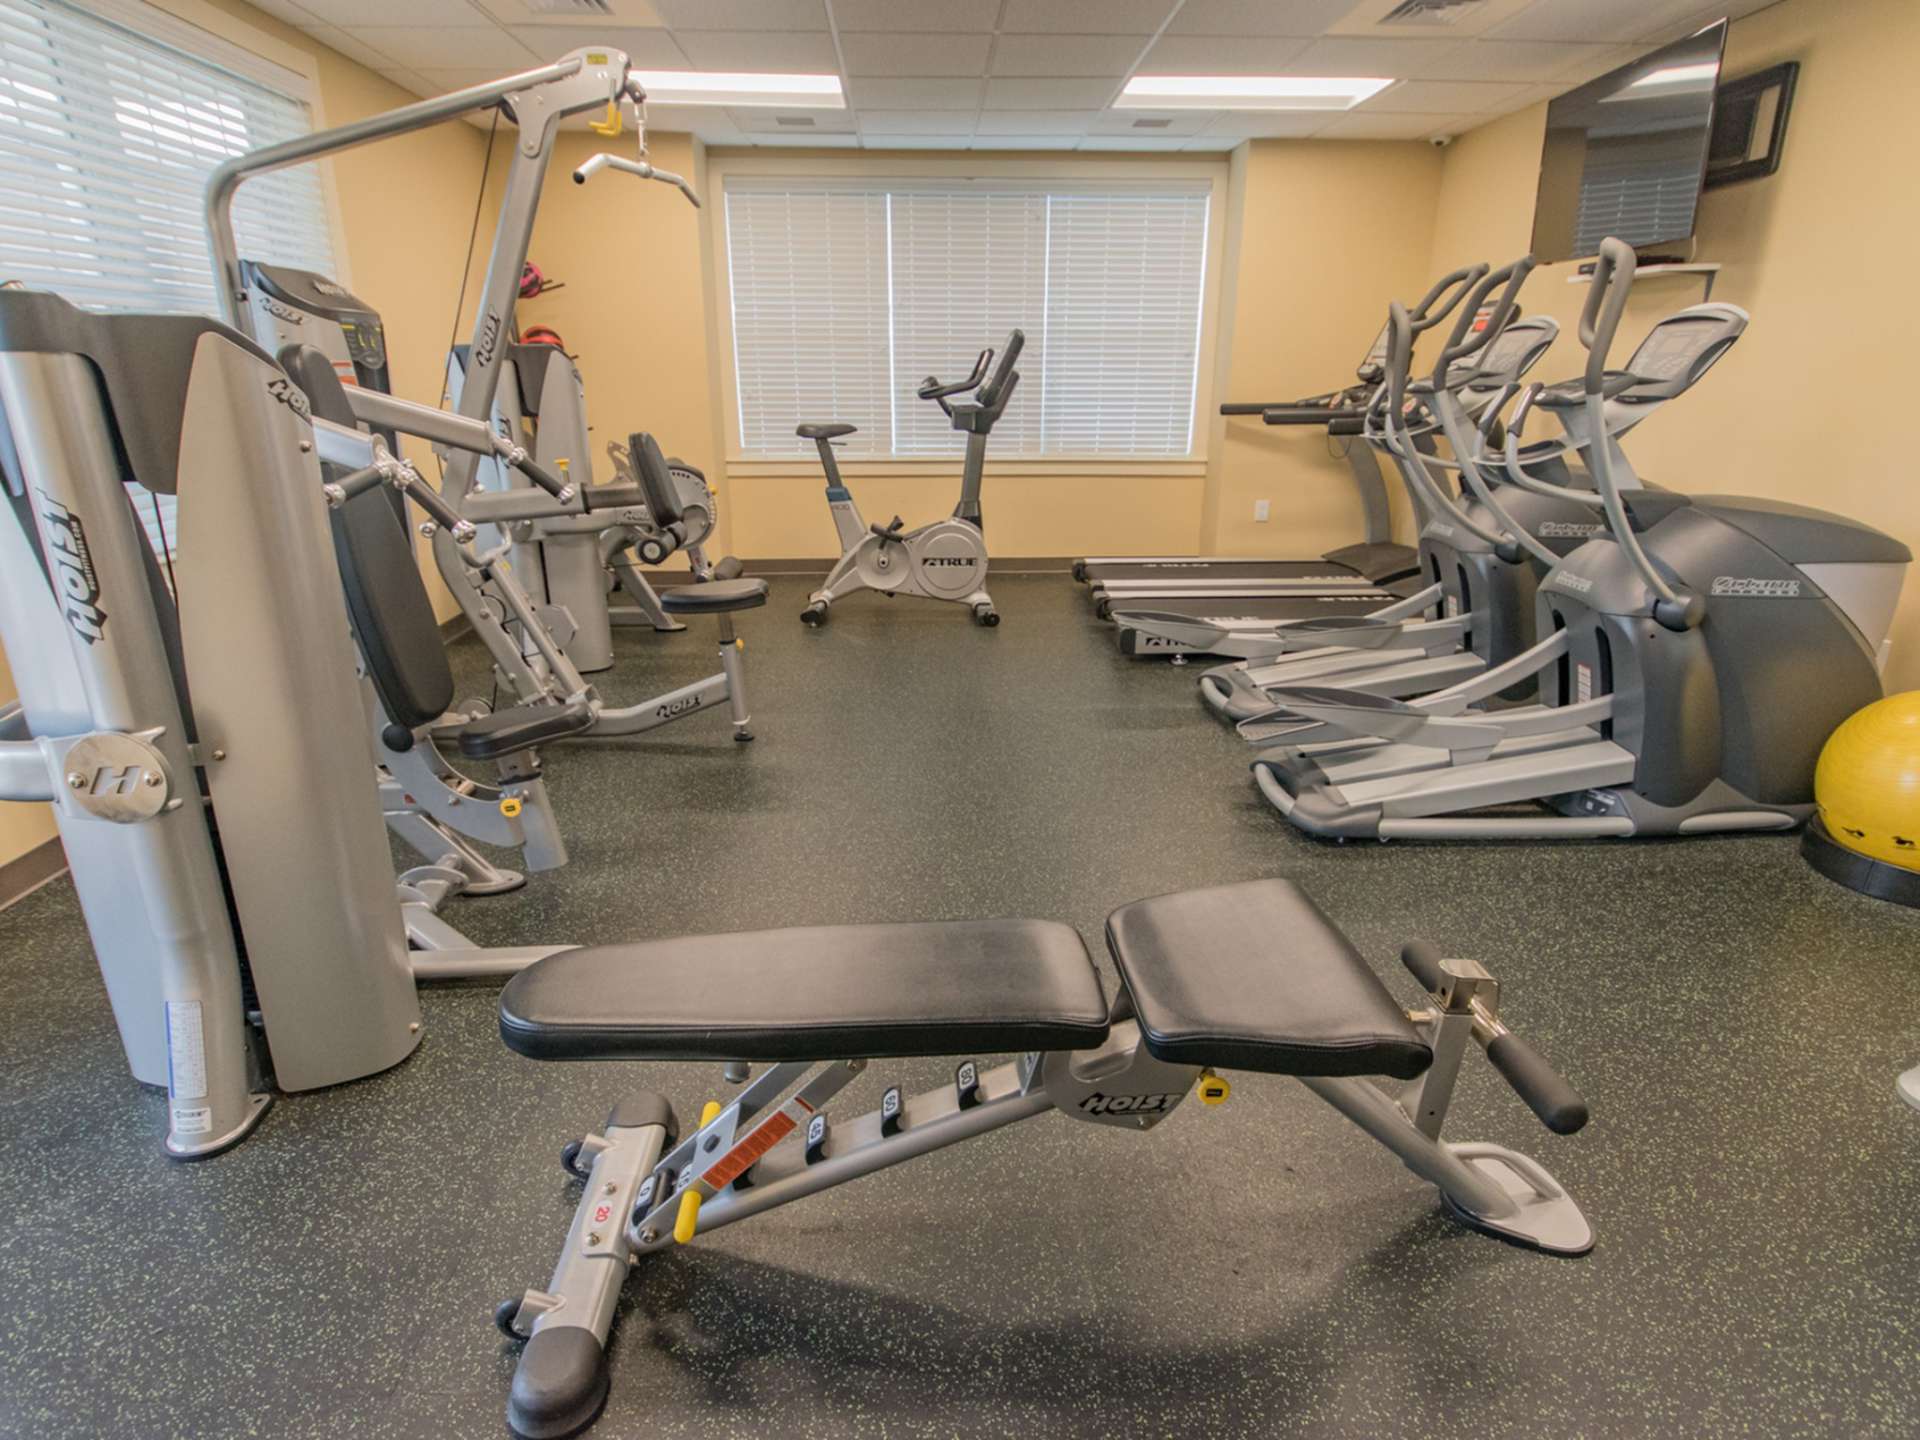 Indoor gym with various workout equipment, 2 large windows, and a tv on the wall.